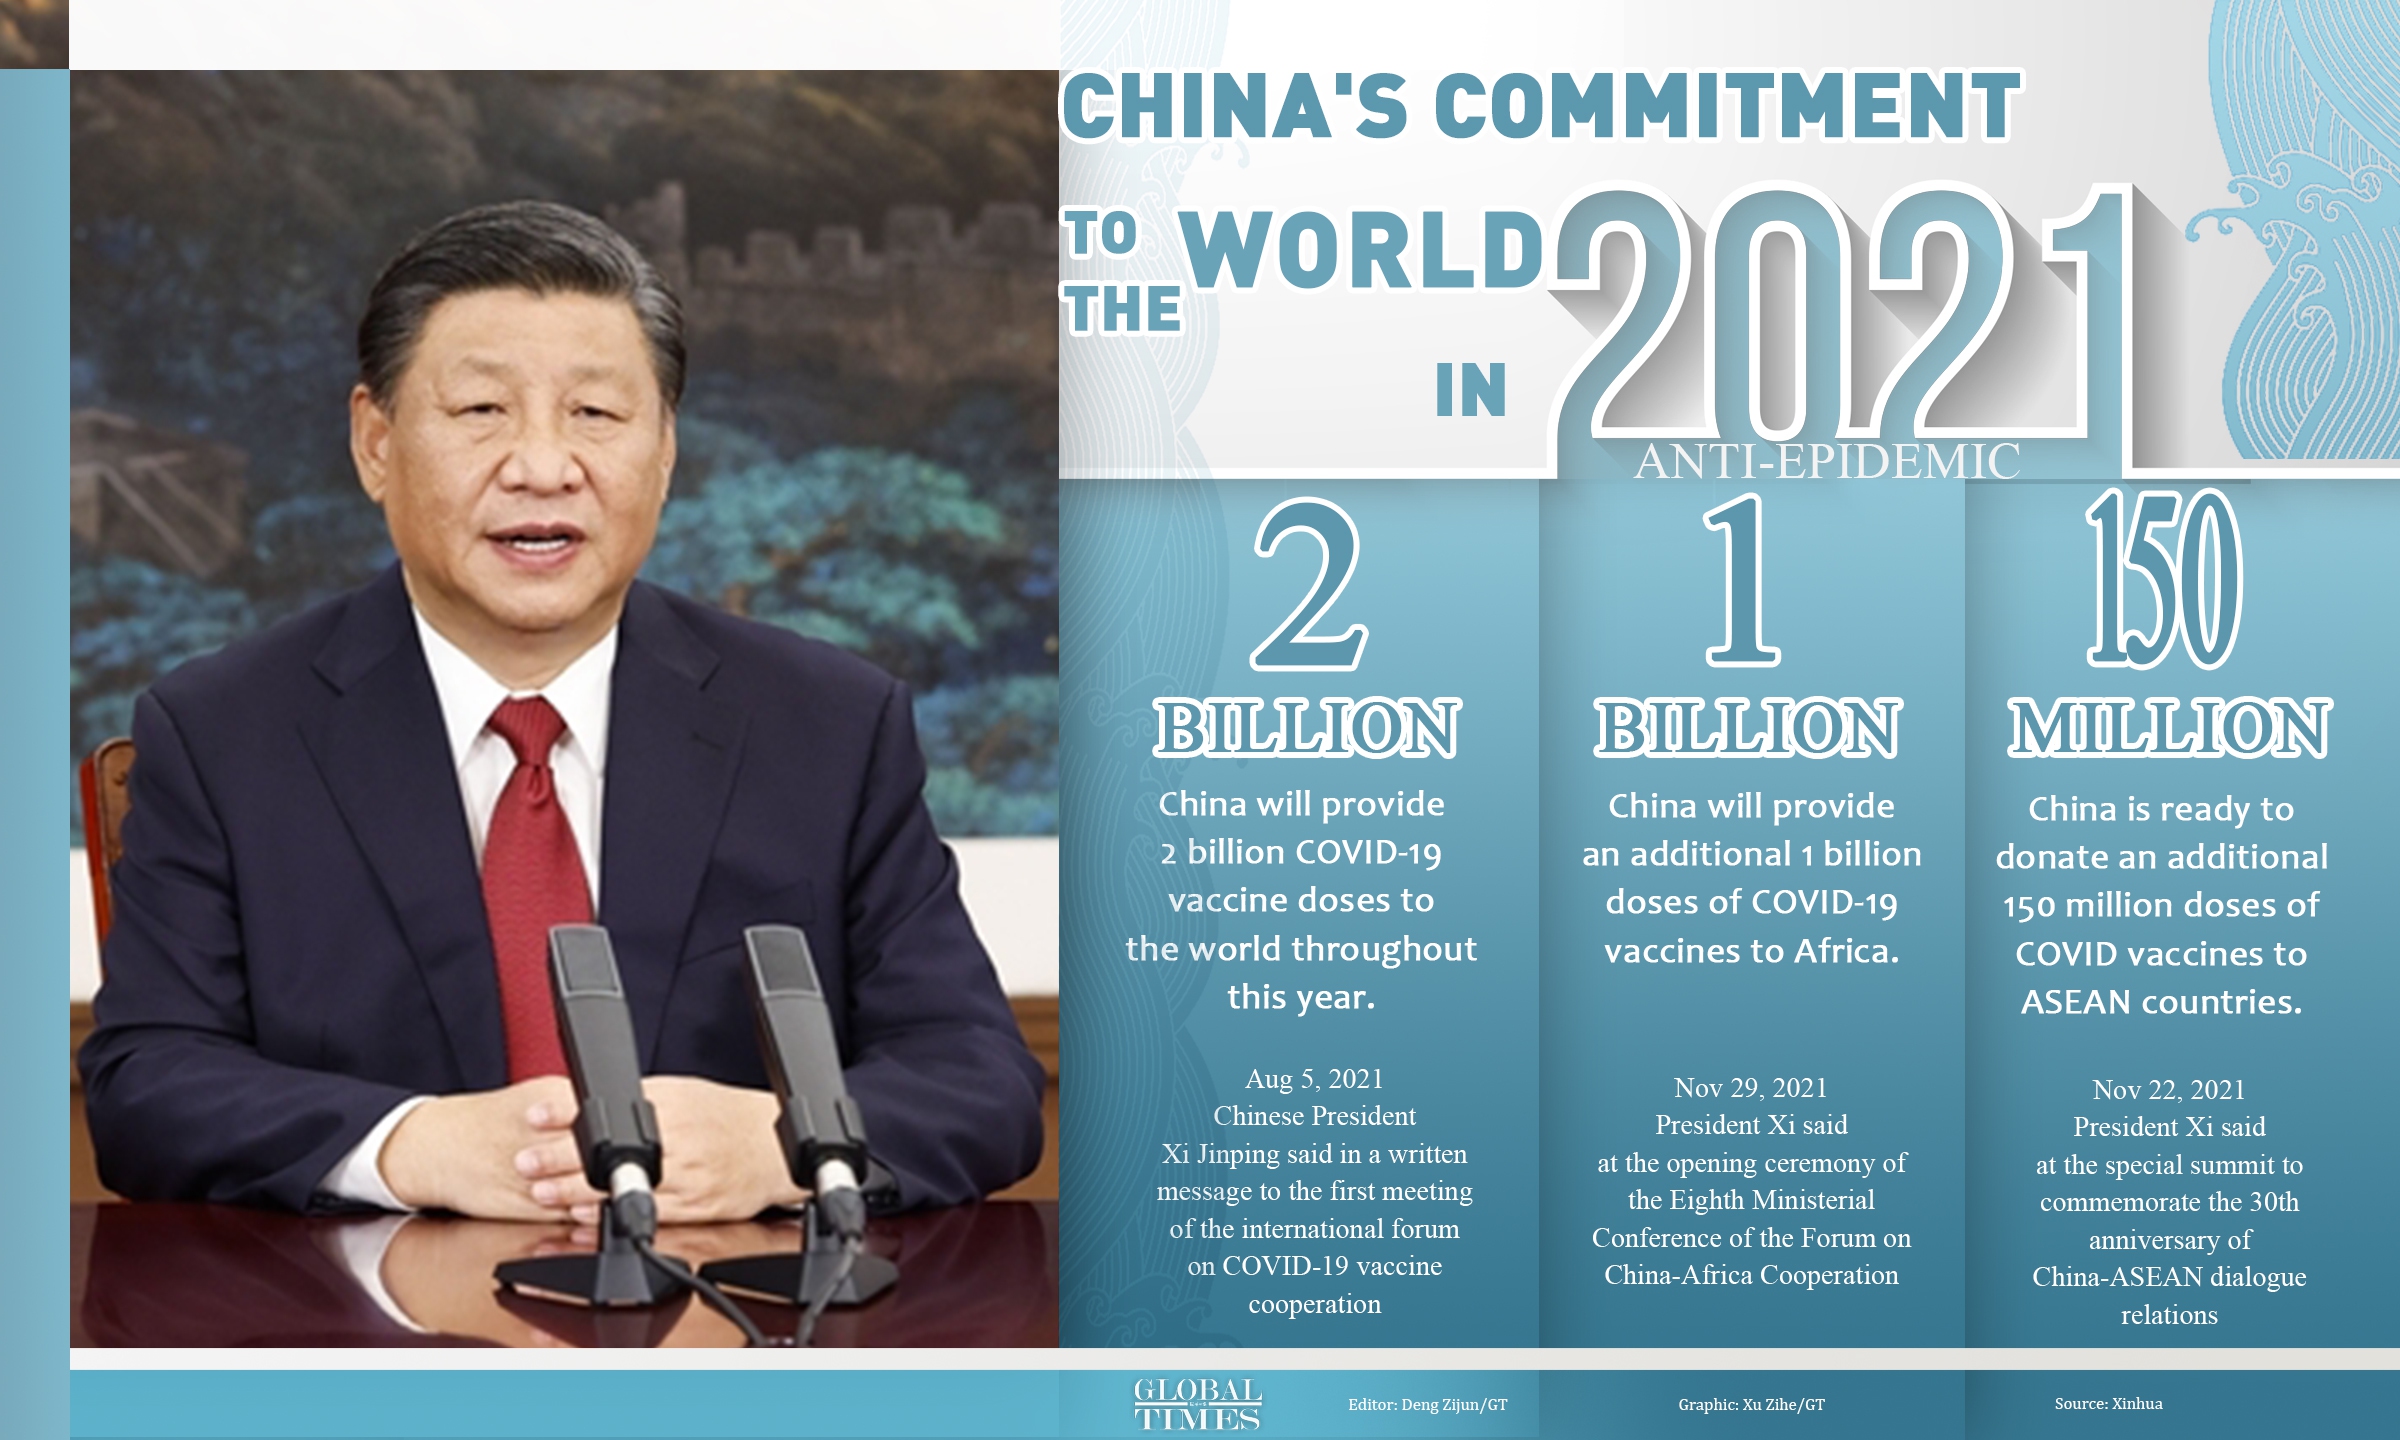 China's commitment to the world